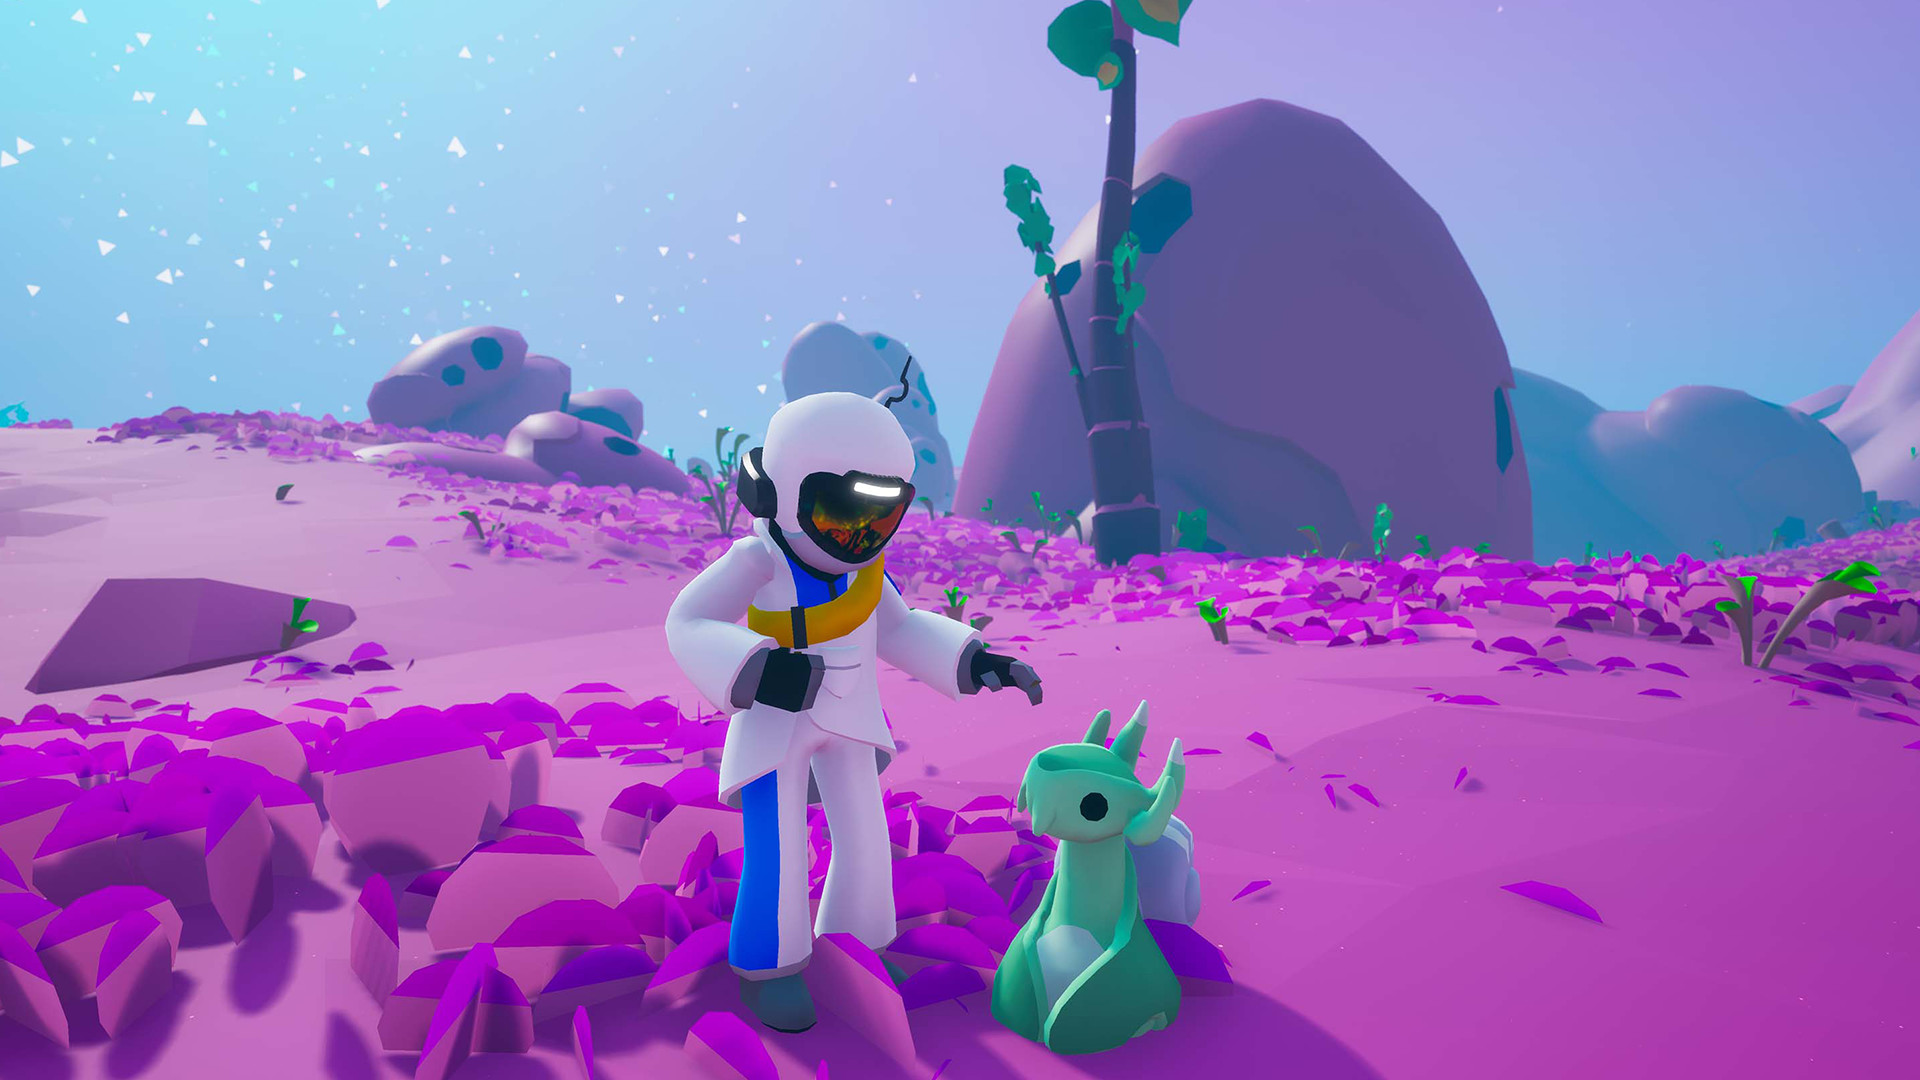 ASTRONEER Free Download for PC